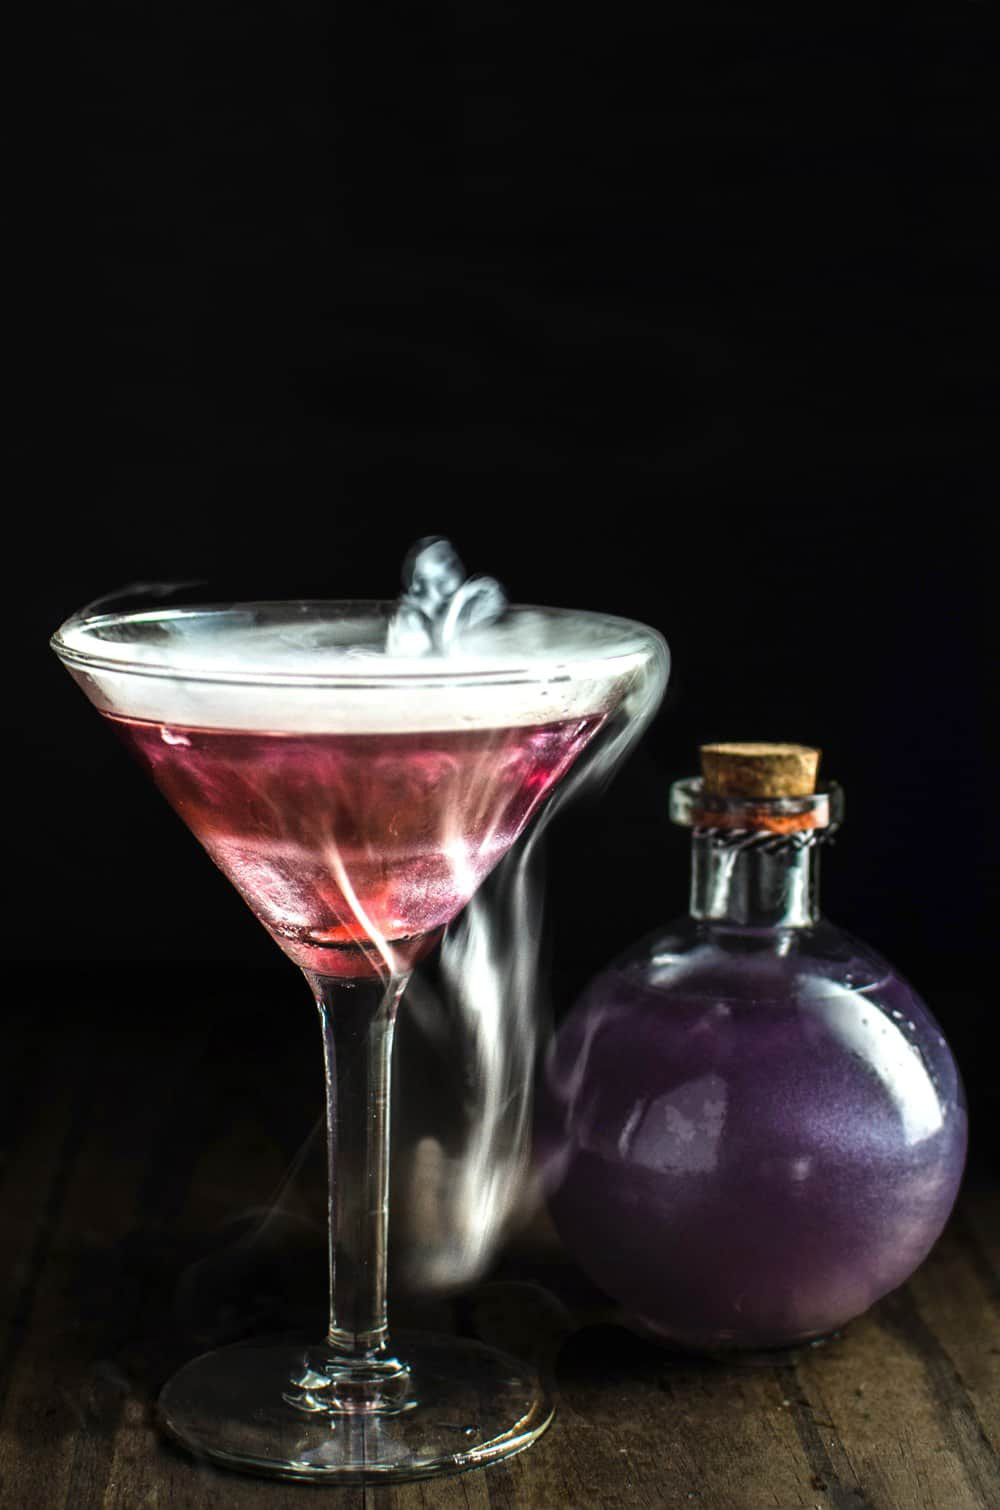 Halloween Themed Alcoholic Drinks
 The Witch s Heart Halloween Cocktail